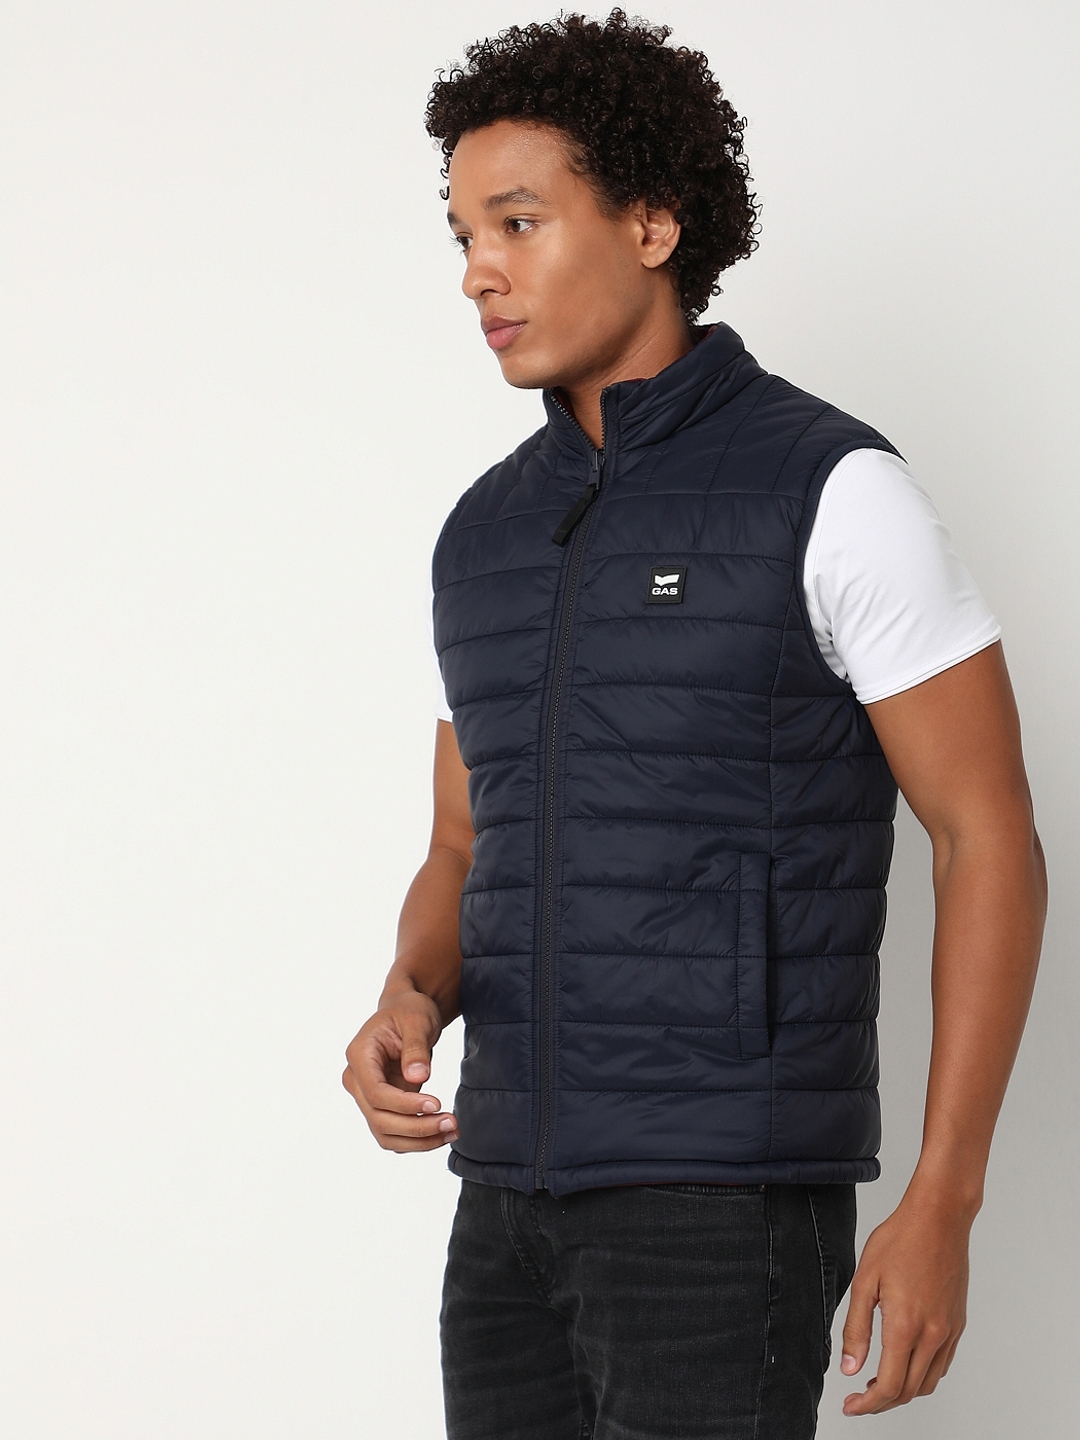 High Neck Body Warmer: Best High Neck Body Warmers in India for